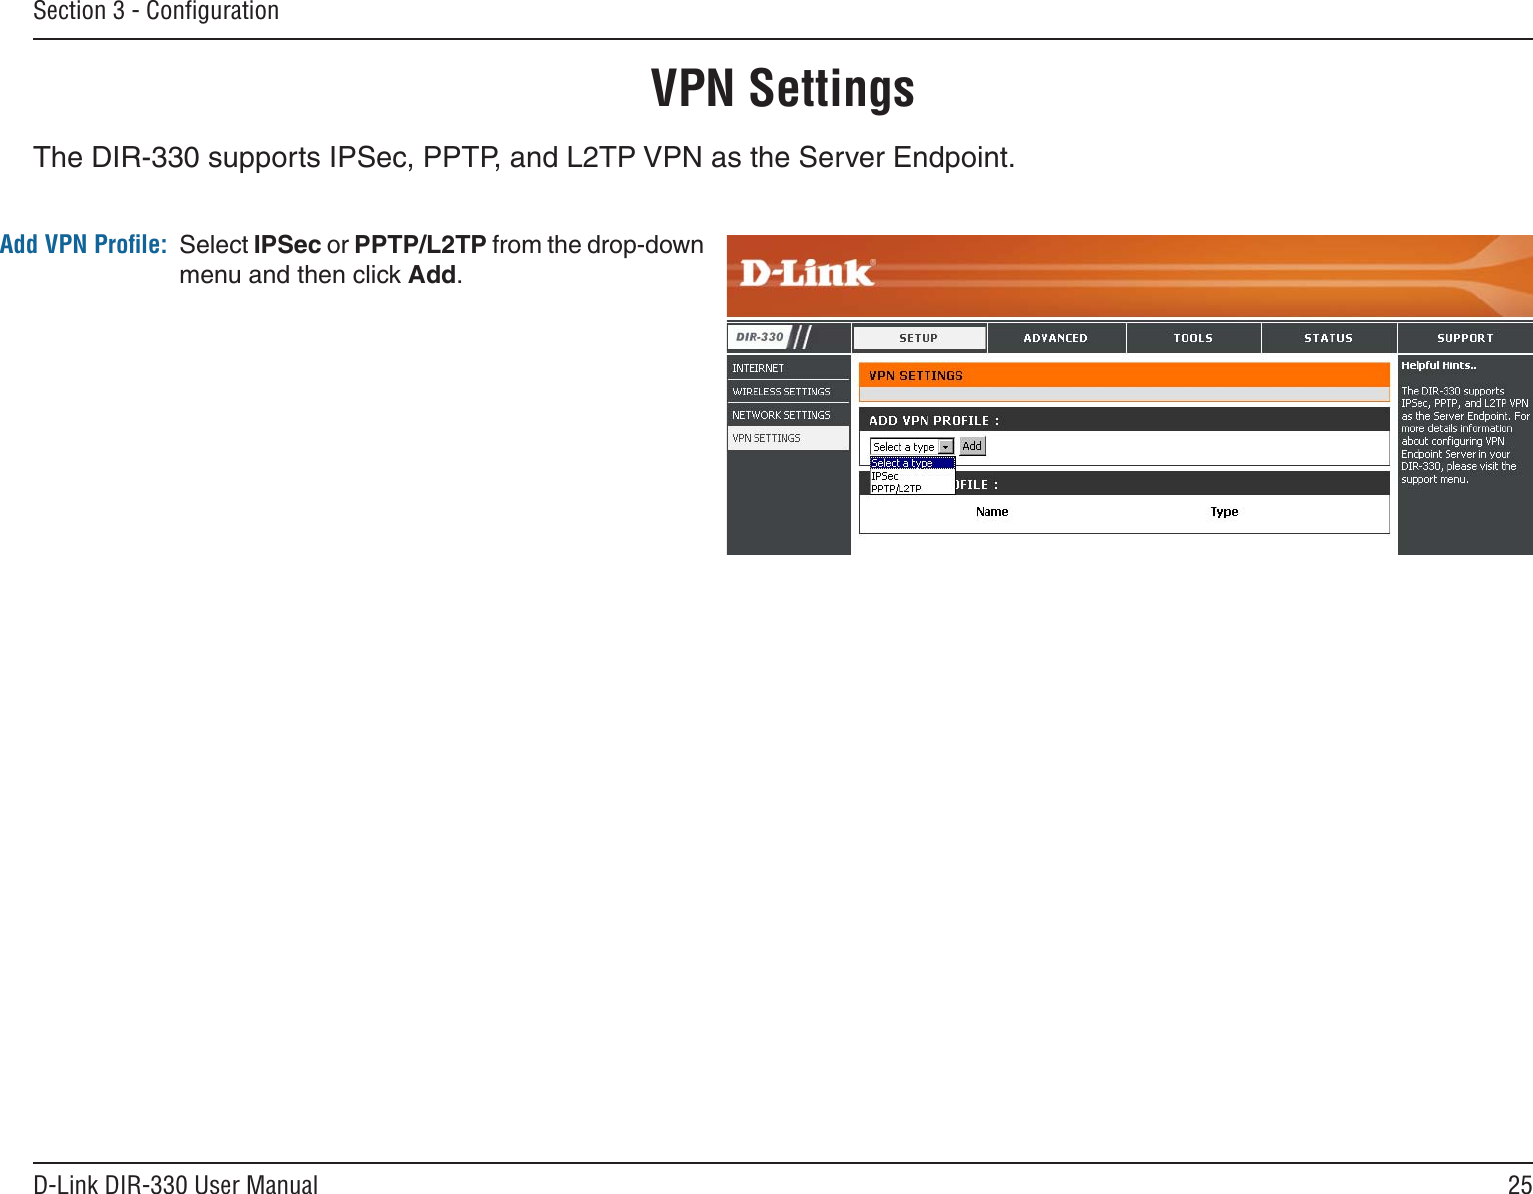 25D-Link DIR-330 User ManualSection 3 - ConﬁgurationVPN SettingsThe DIR-330 supports IPSec, PPTP, and L2TP VPN as the Server Endpoint.Select IPSec or PPTP/L2TP from the drop-down menu and then click Add.Add VPN Proﬁle: